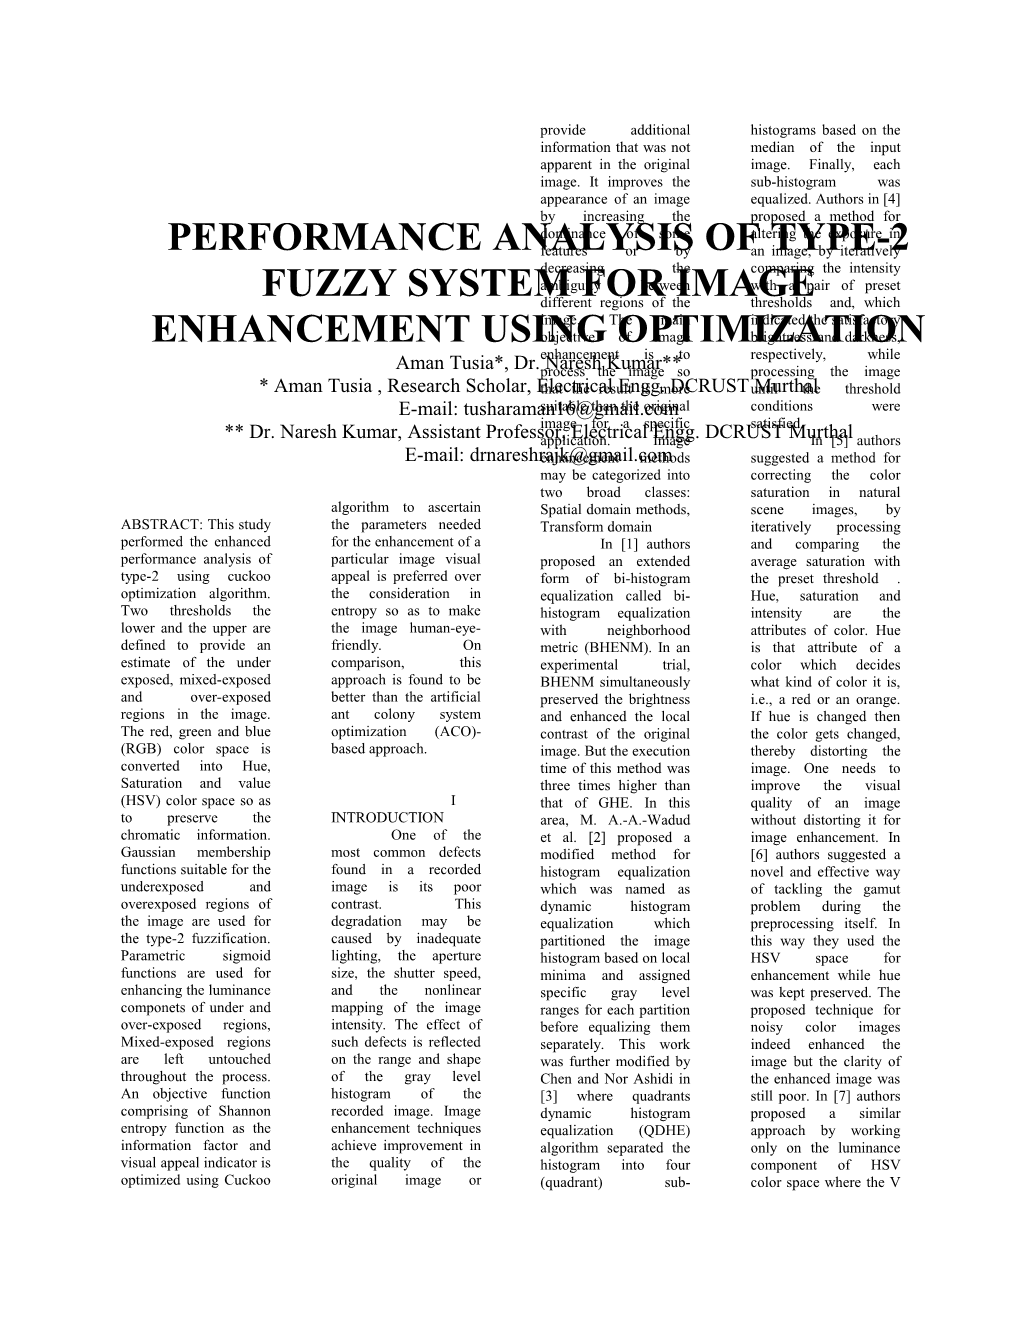 ABSTRACT: This Study Performed the Enhanced Performance Analysis of Type-2 Using Cuckoo